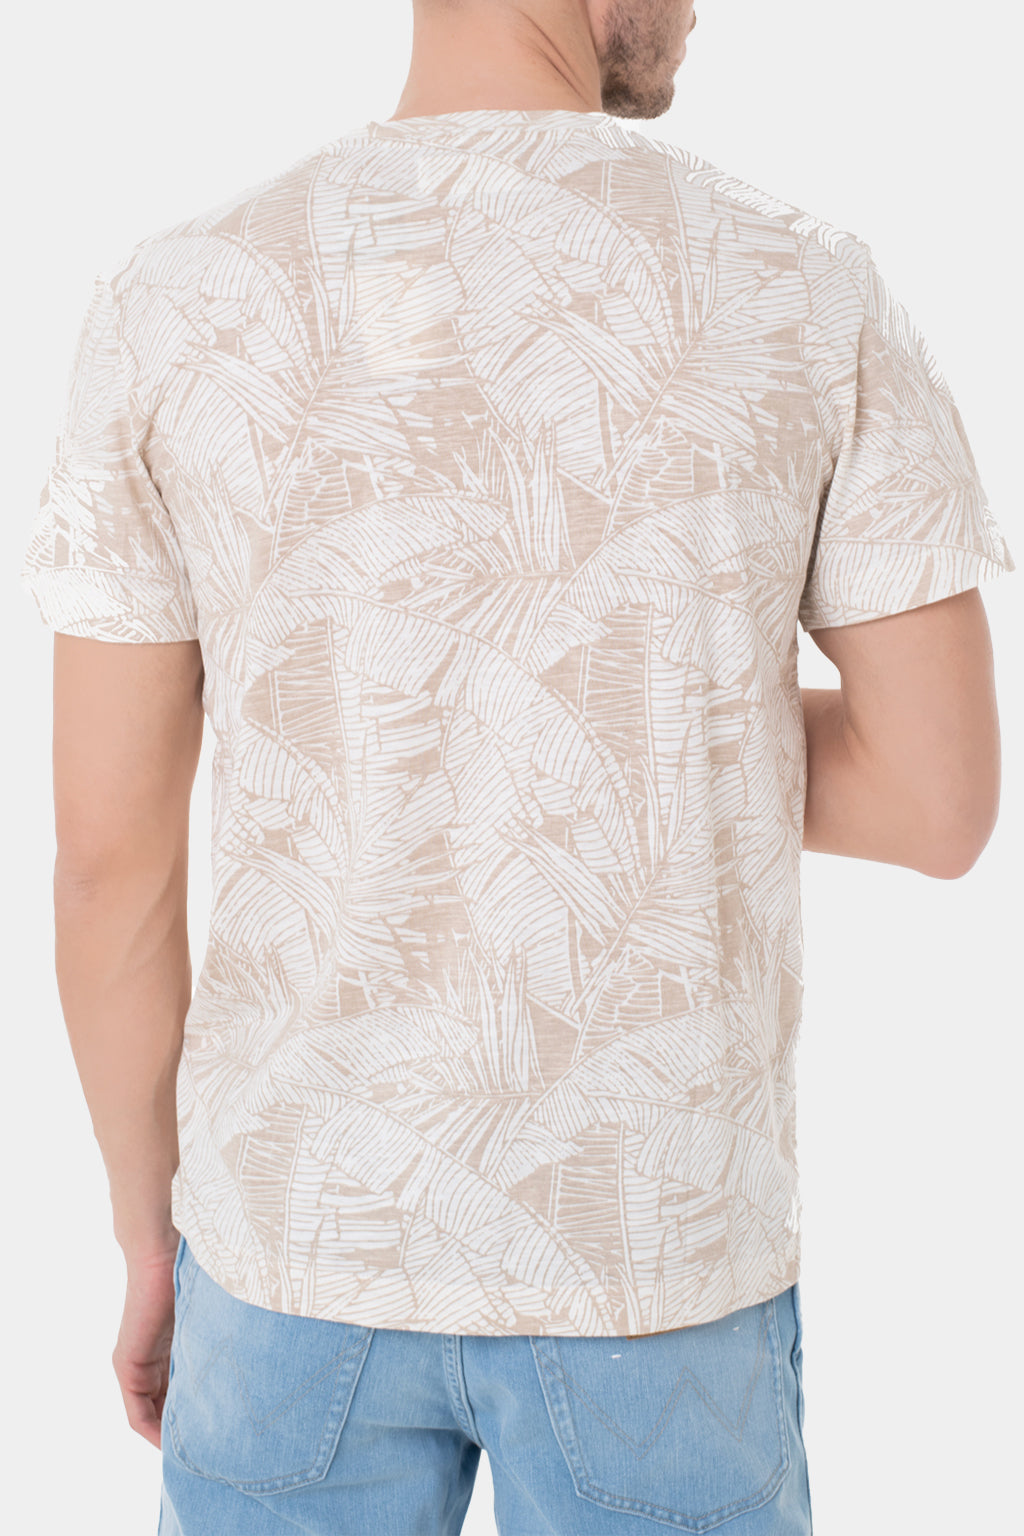 Tom Tailor - All-over Printed T-shirt